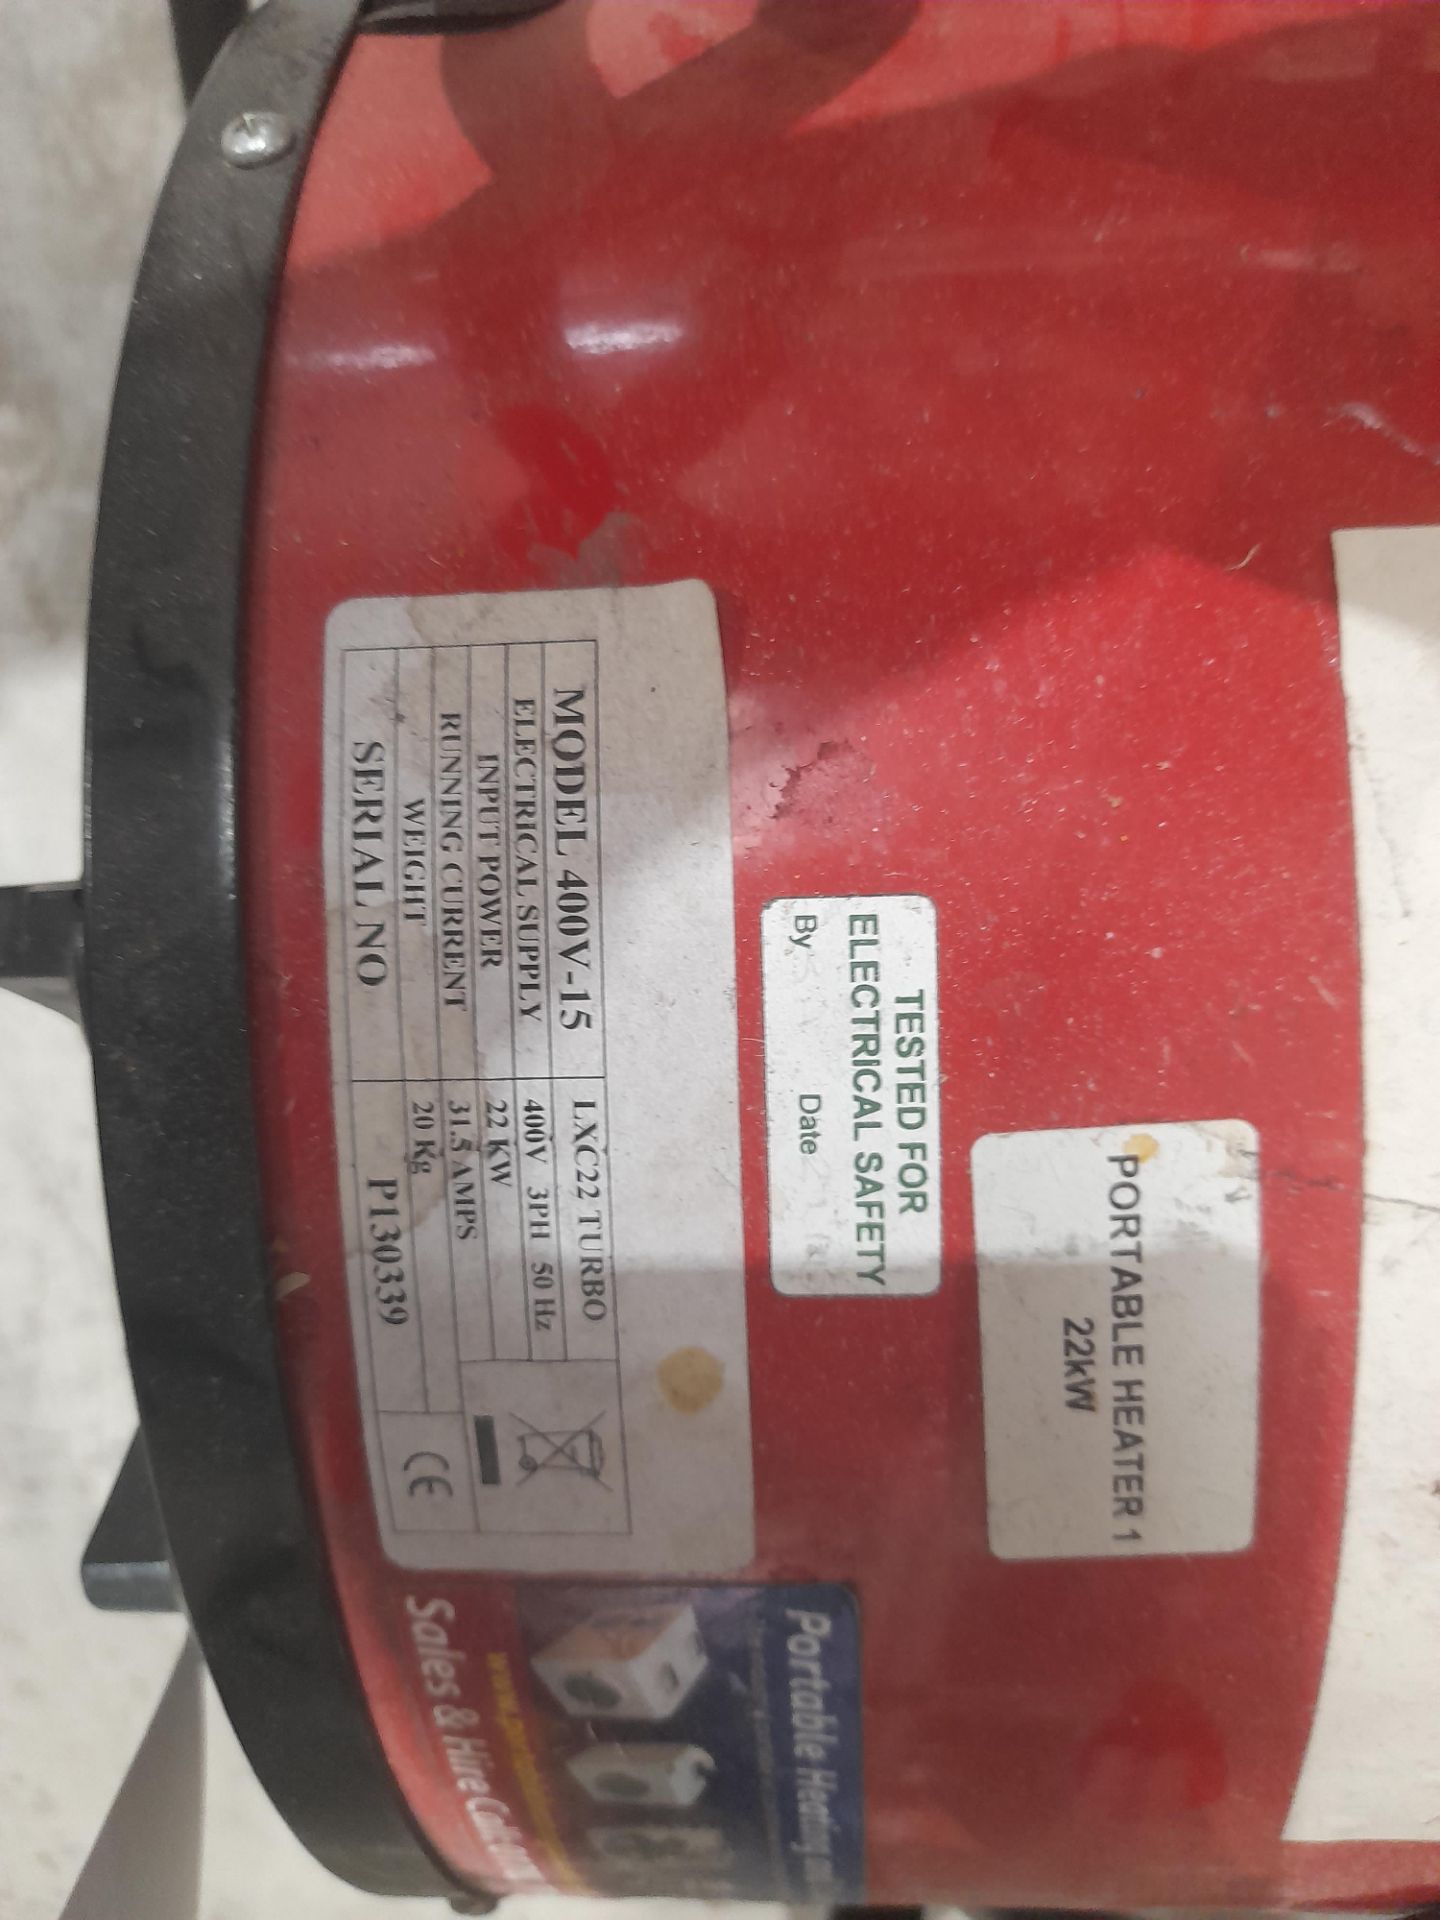 Model 400v-15 portable electric heating unit - Image 2 of 2